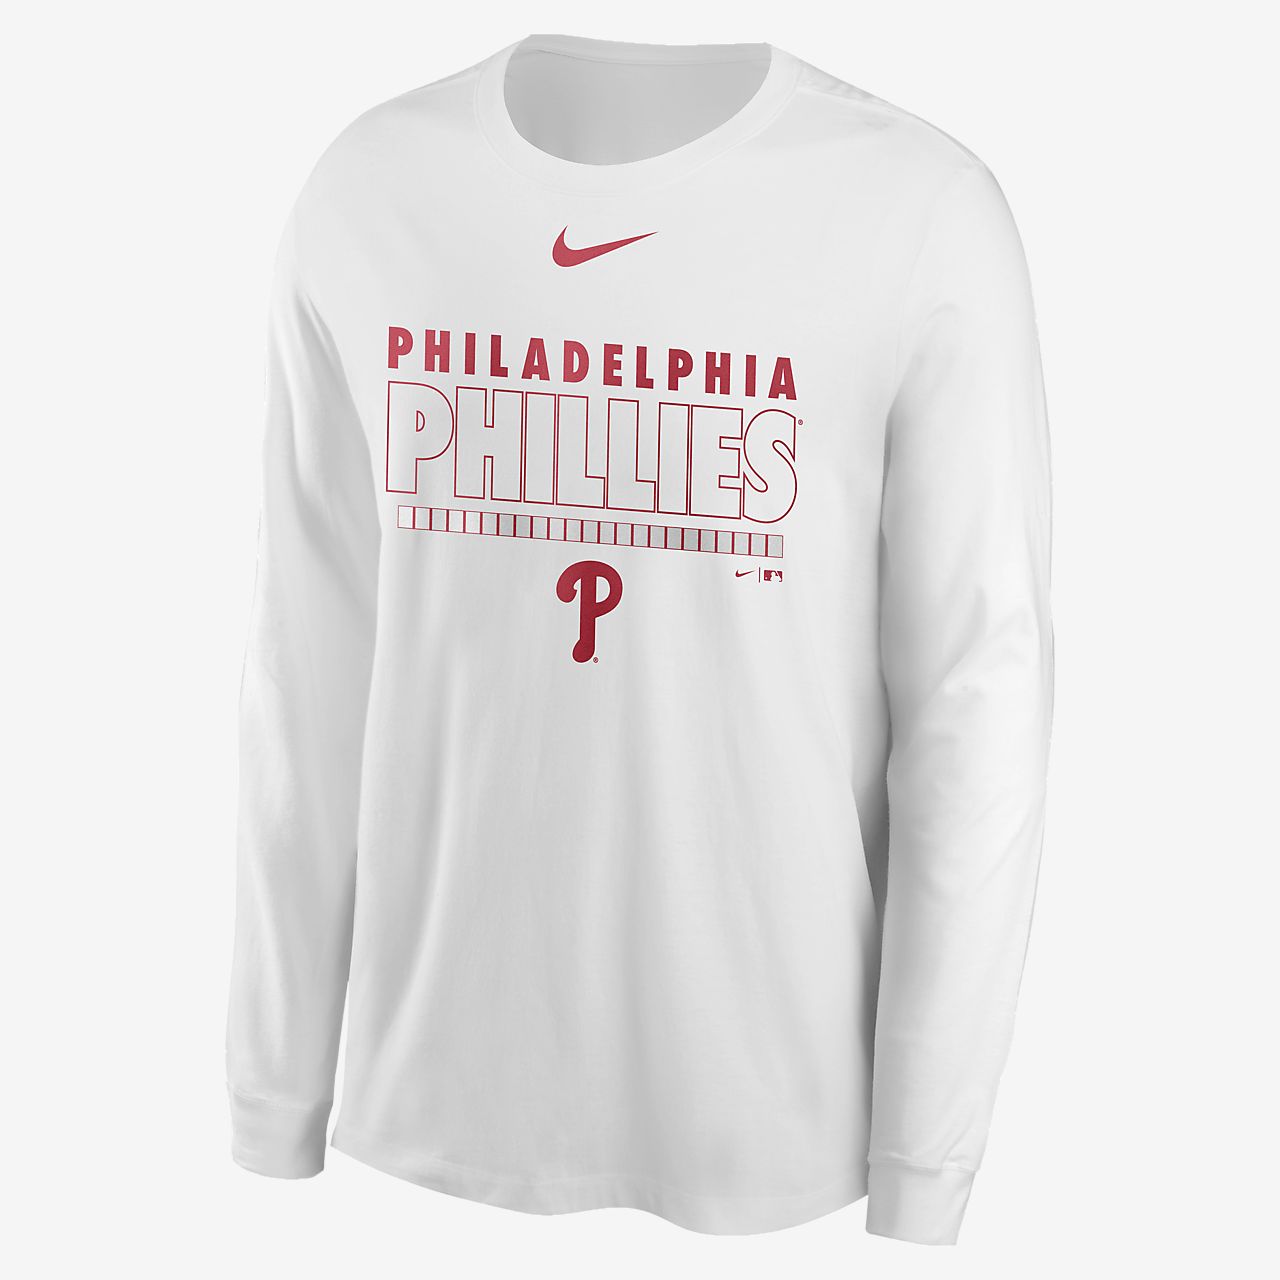 phillies personalized t shirt